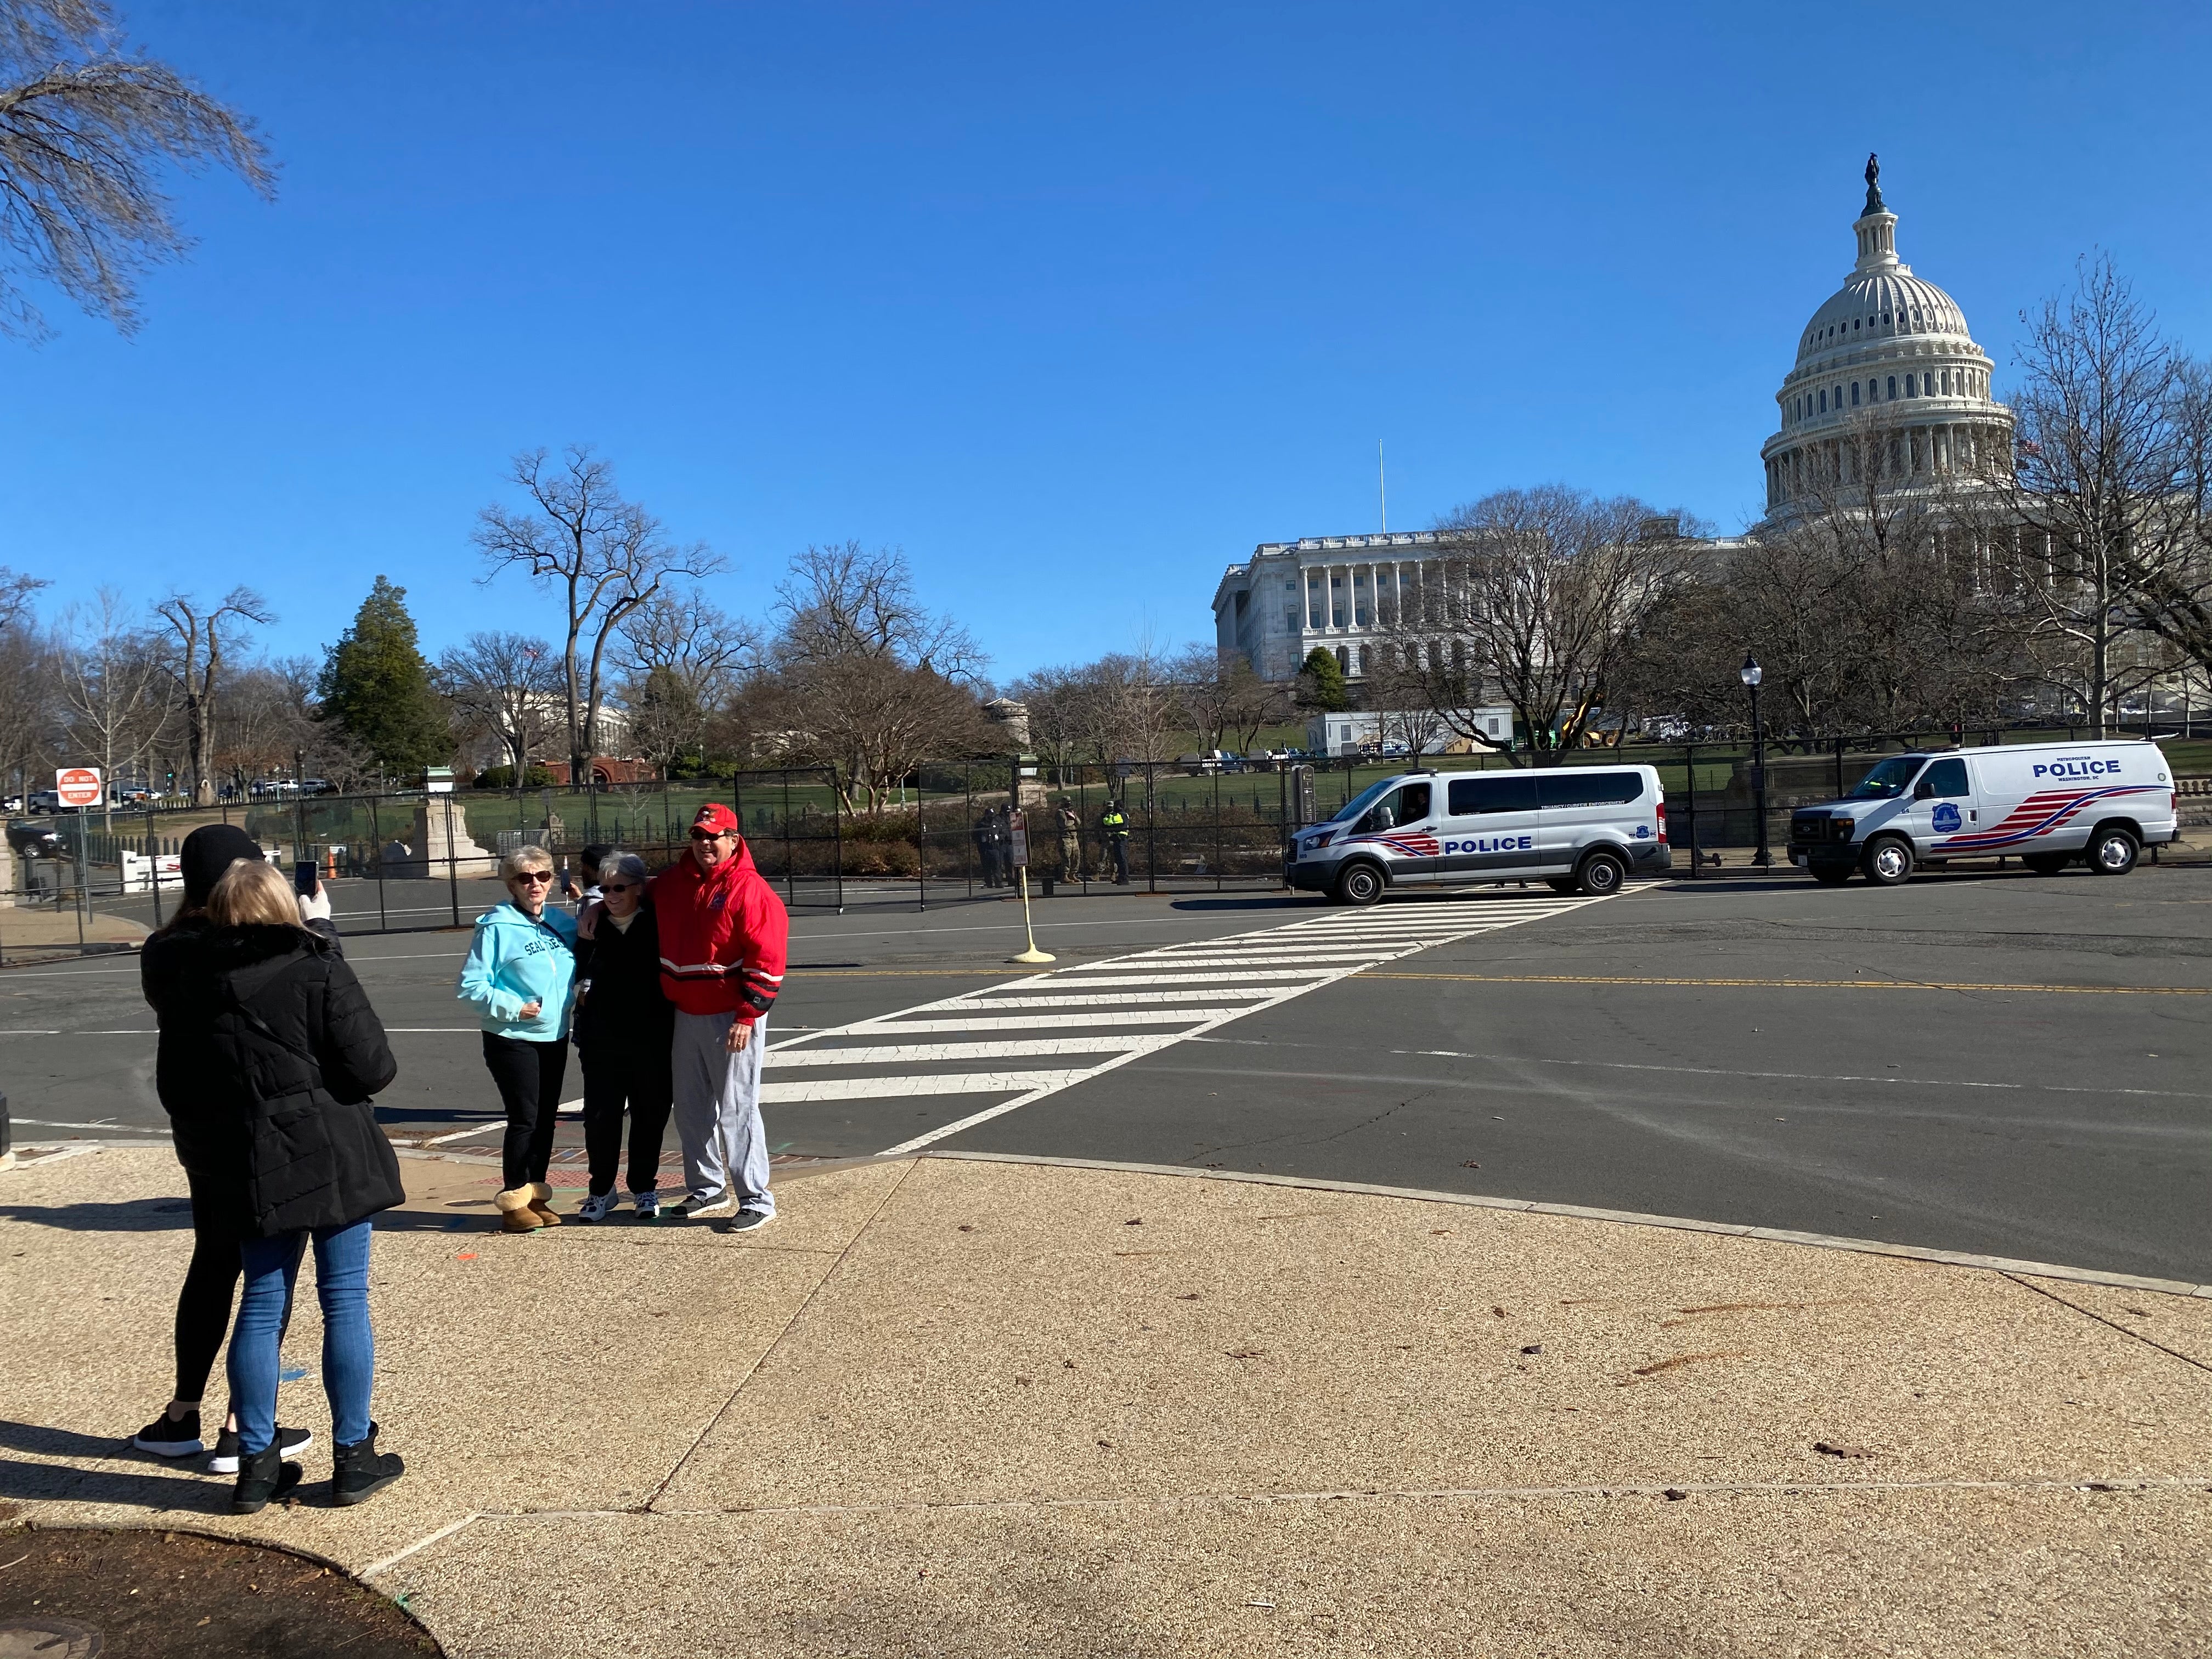 Trump supporters take their picture in front of the Capitol building a day after it was stormed.&nbsp;